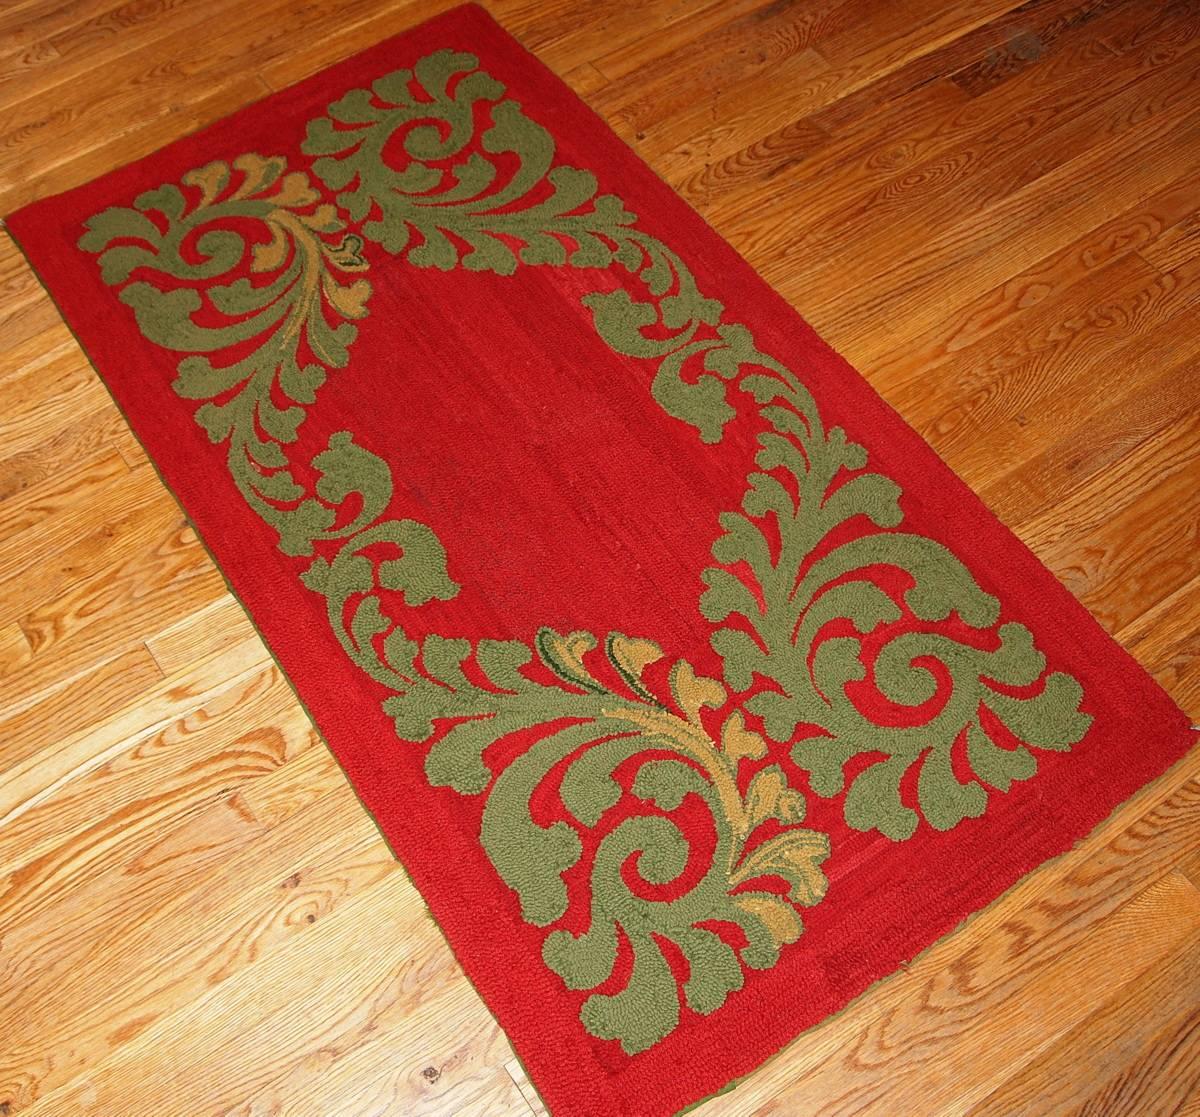 antique hooked rugs for sale